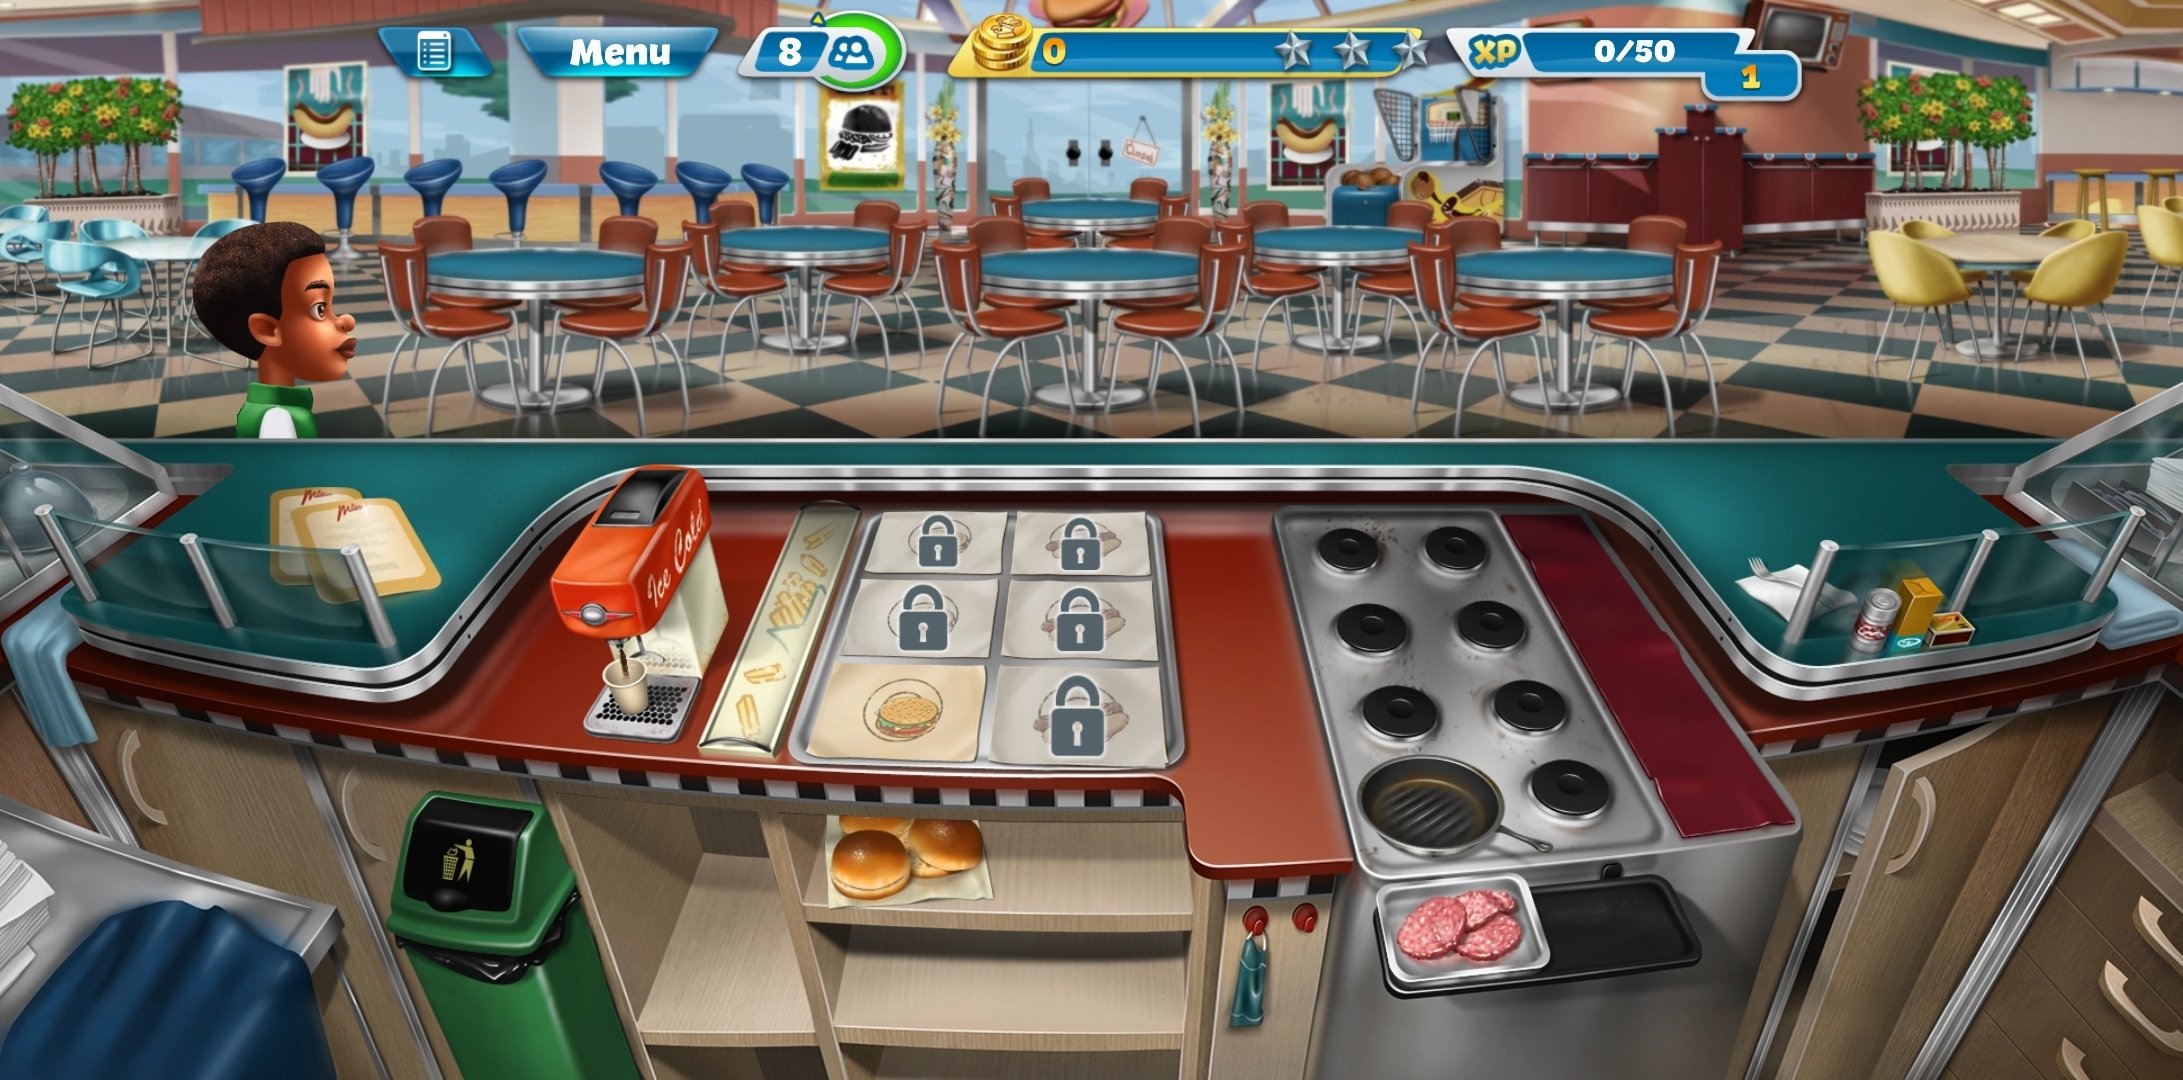 tutorial levels in cooking fever